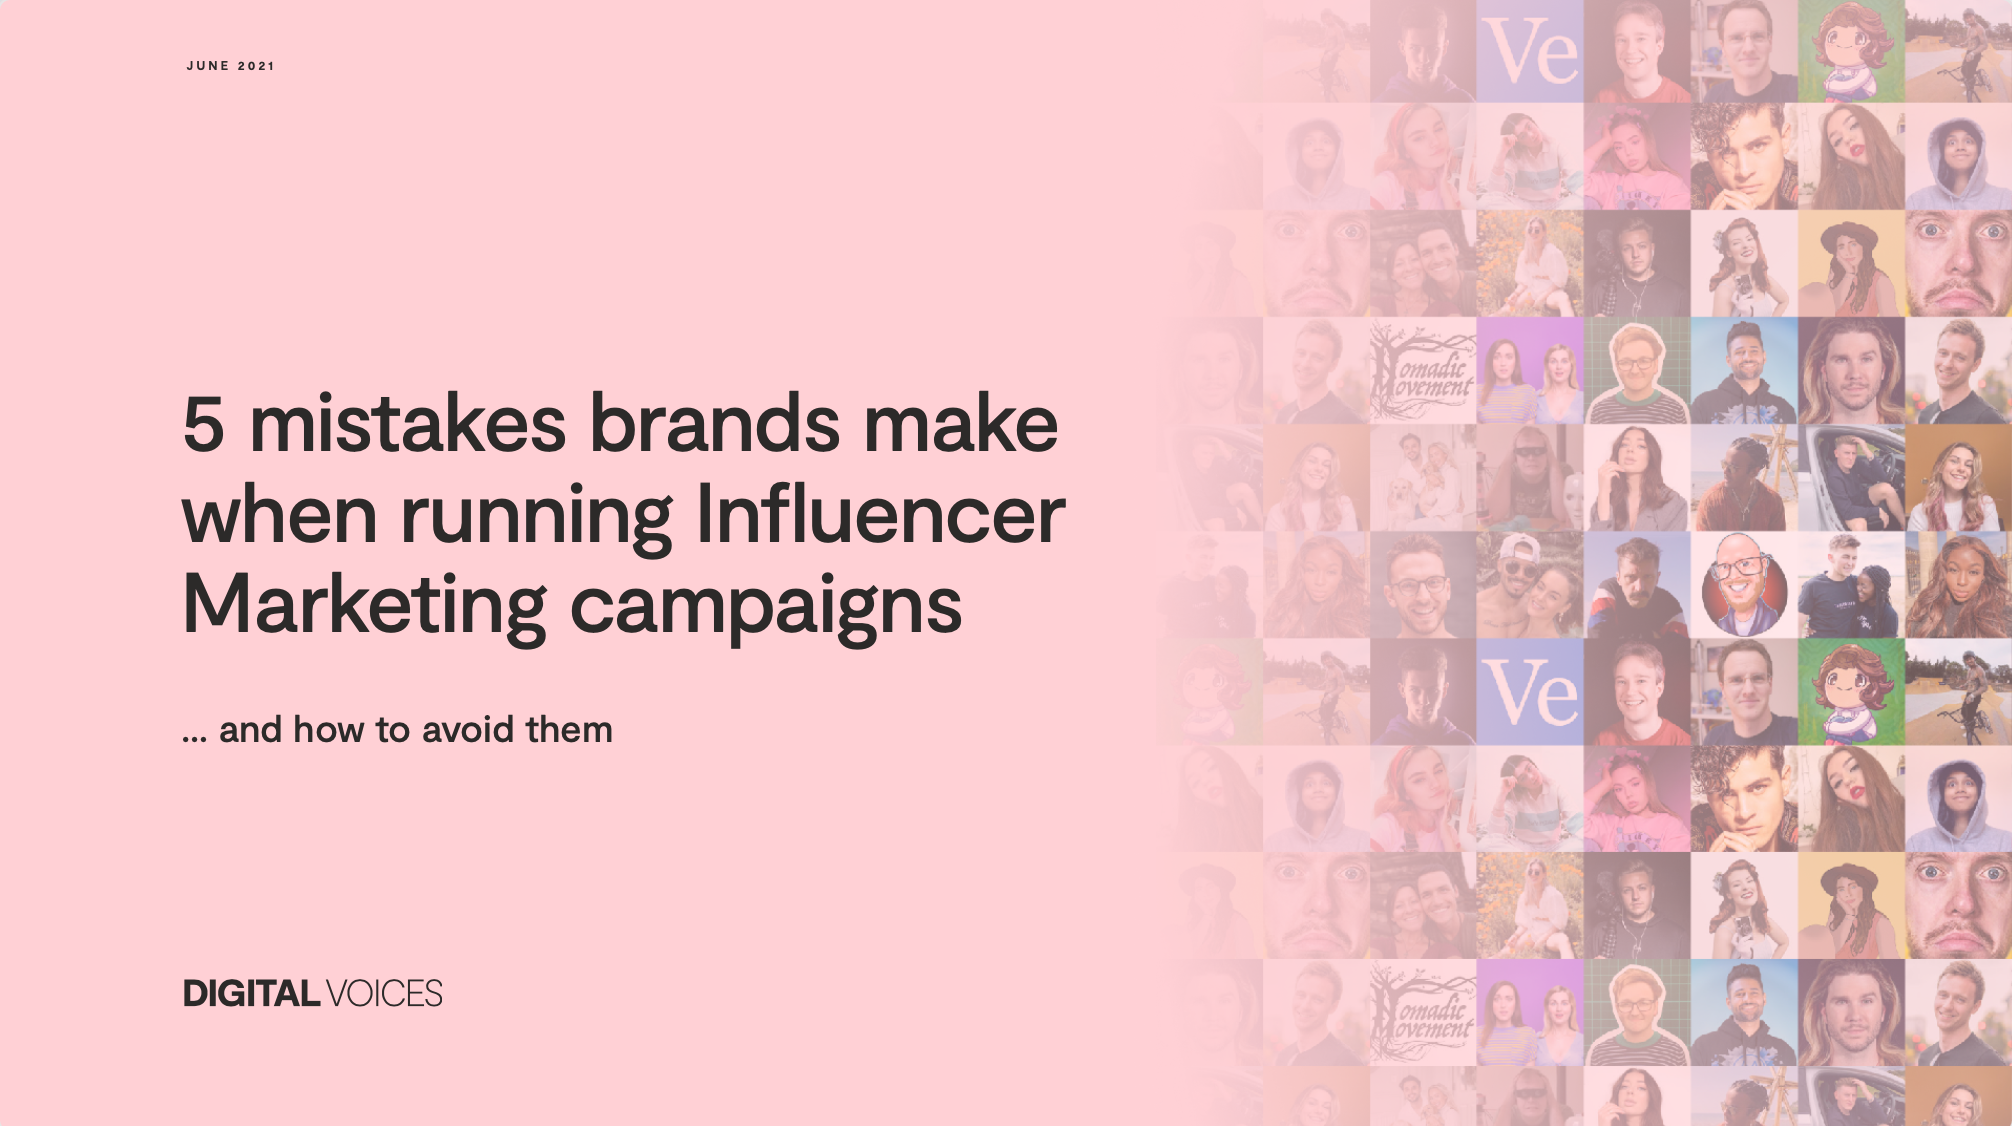 Video: 5 mistakes brands make when running Influencer Marketing campaigns